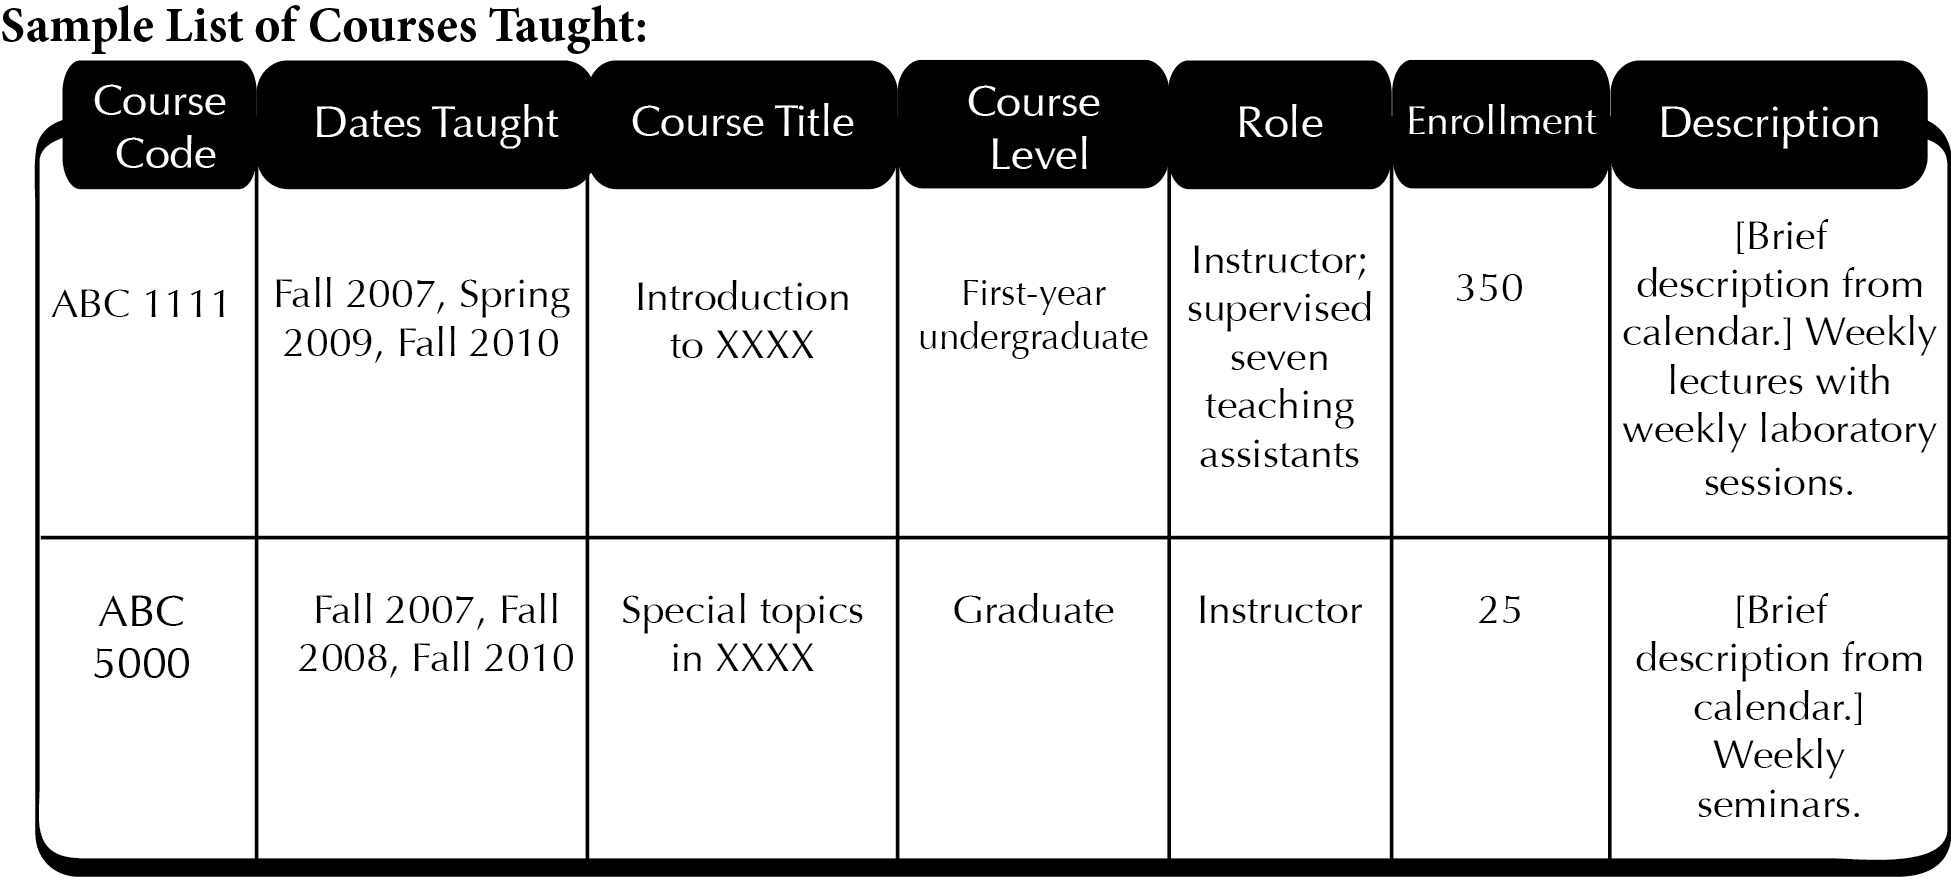 Sample List of Courses Taught